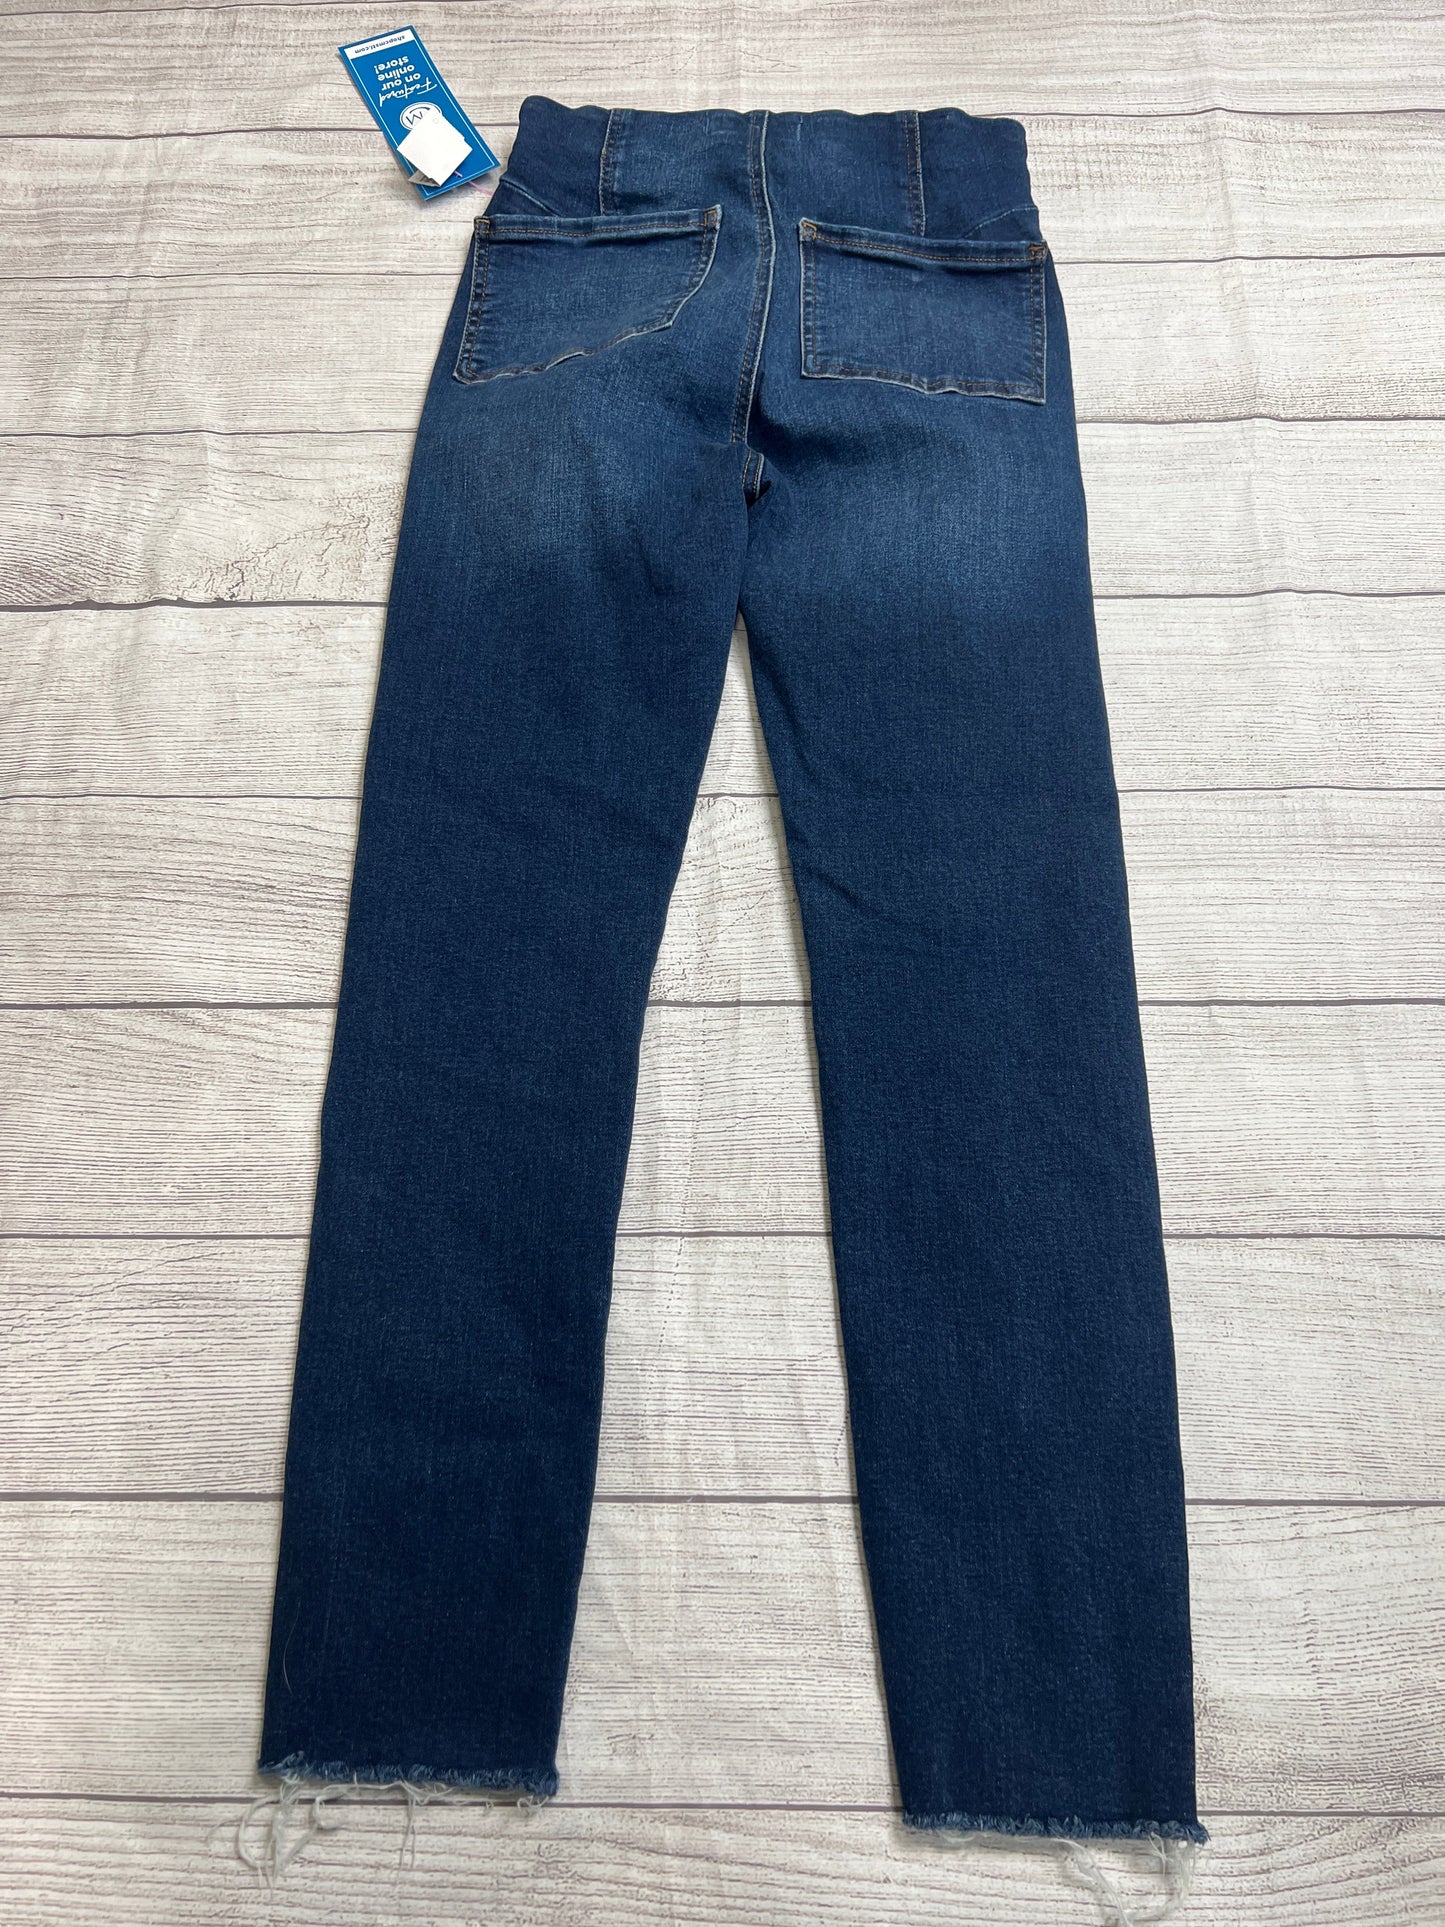 Jeans Skinny By Free People  Size: 2/28